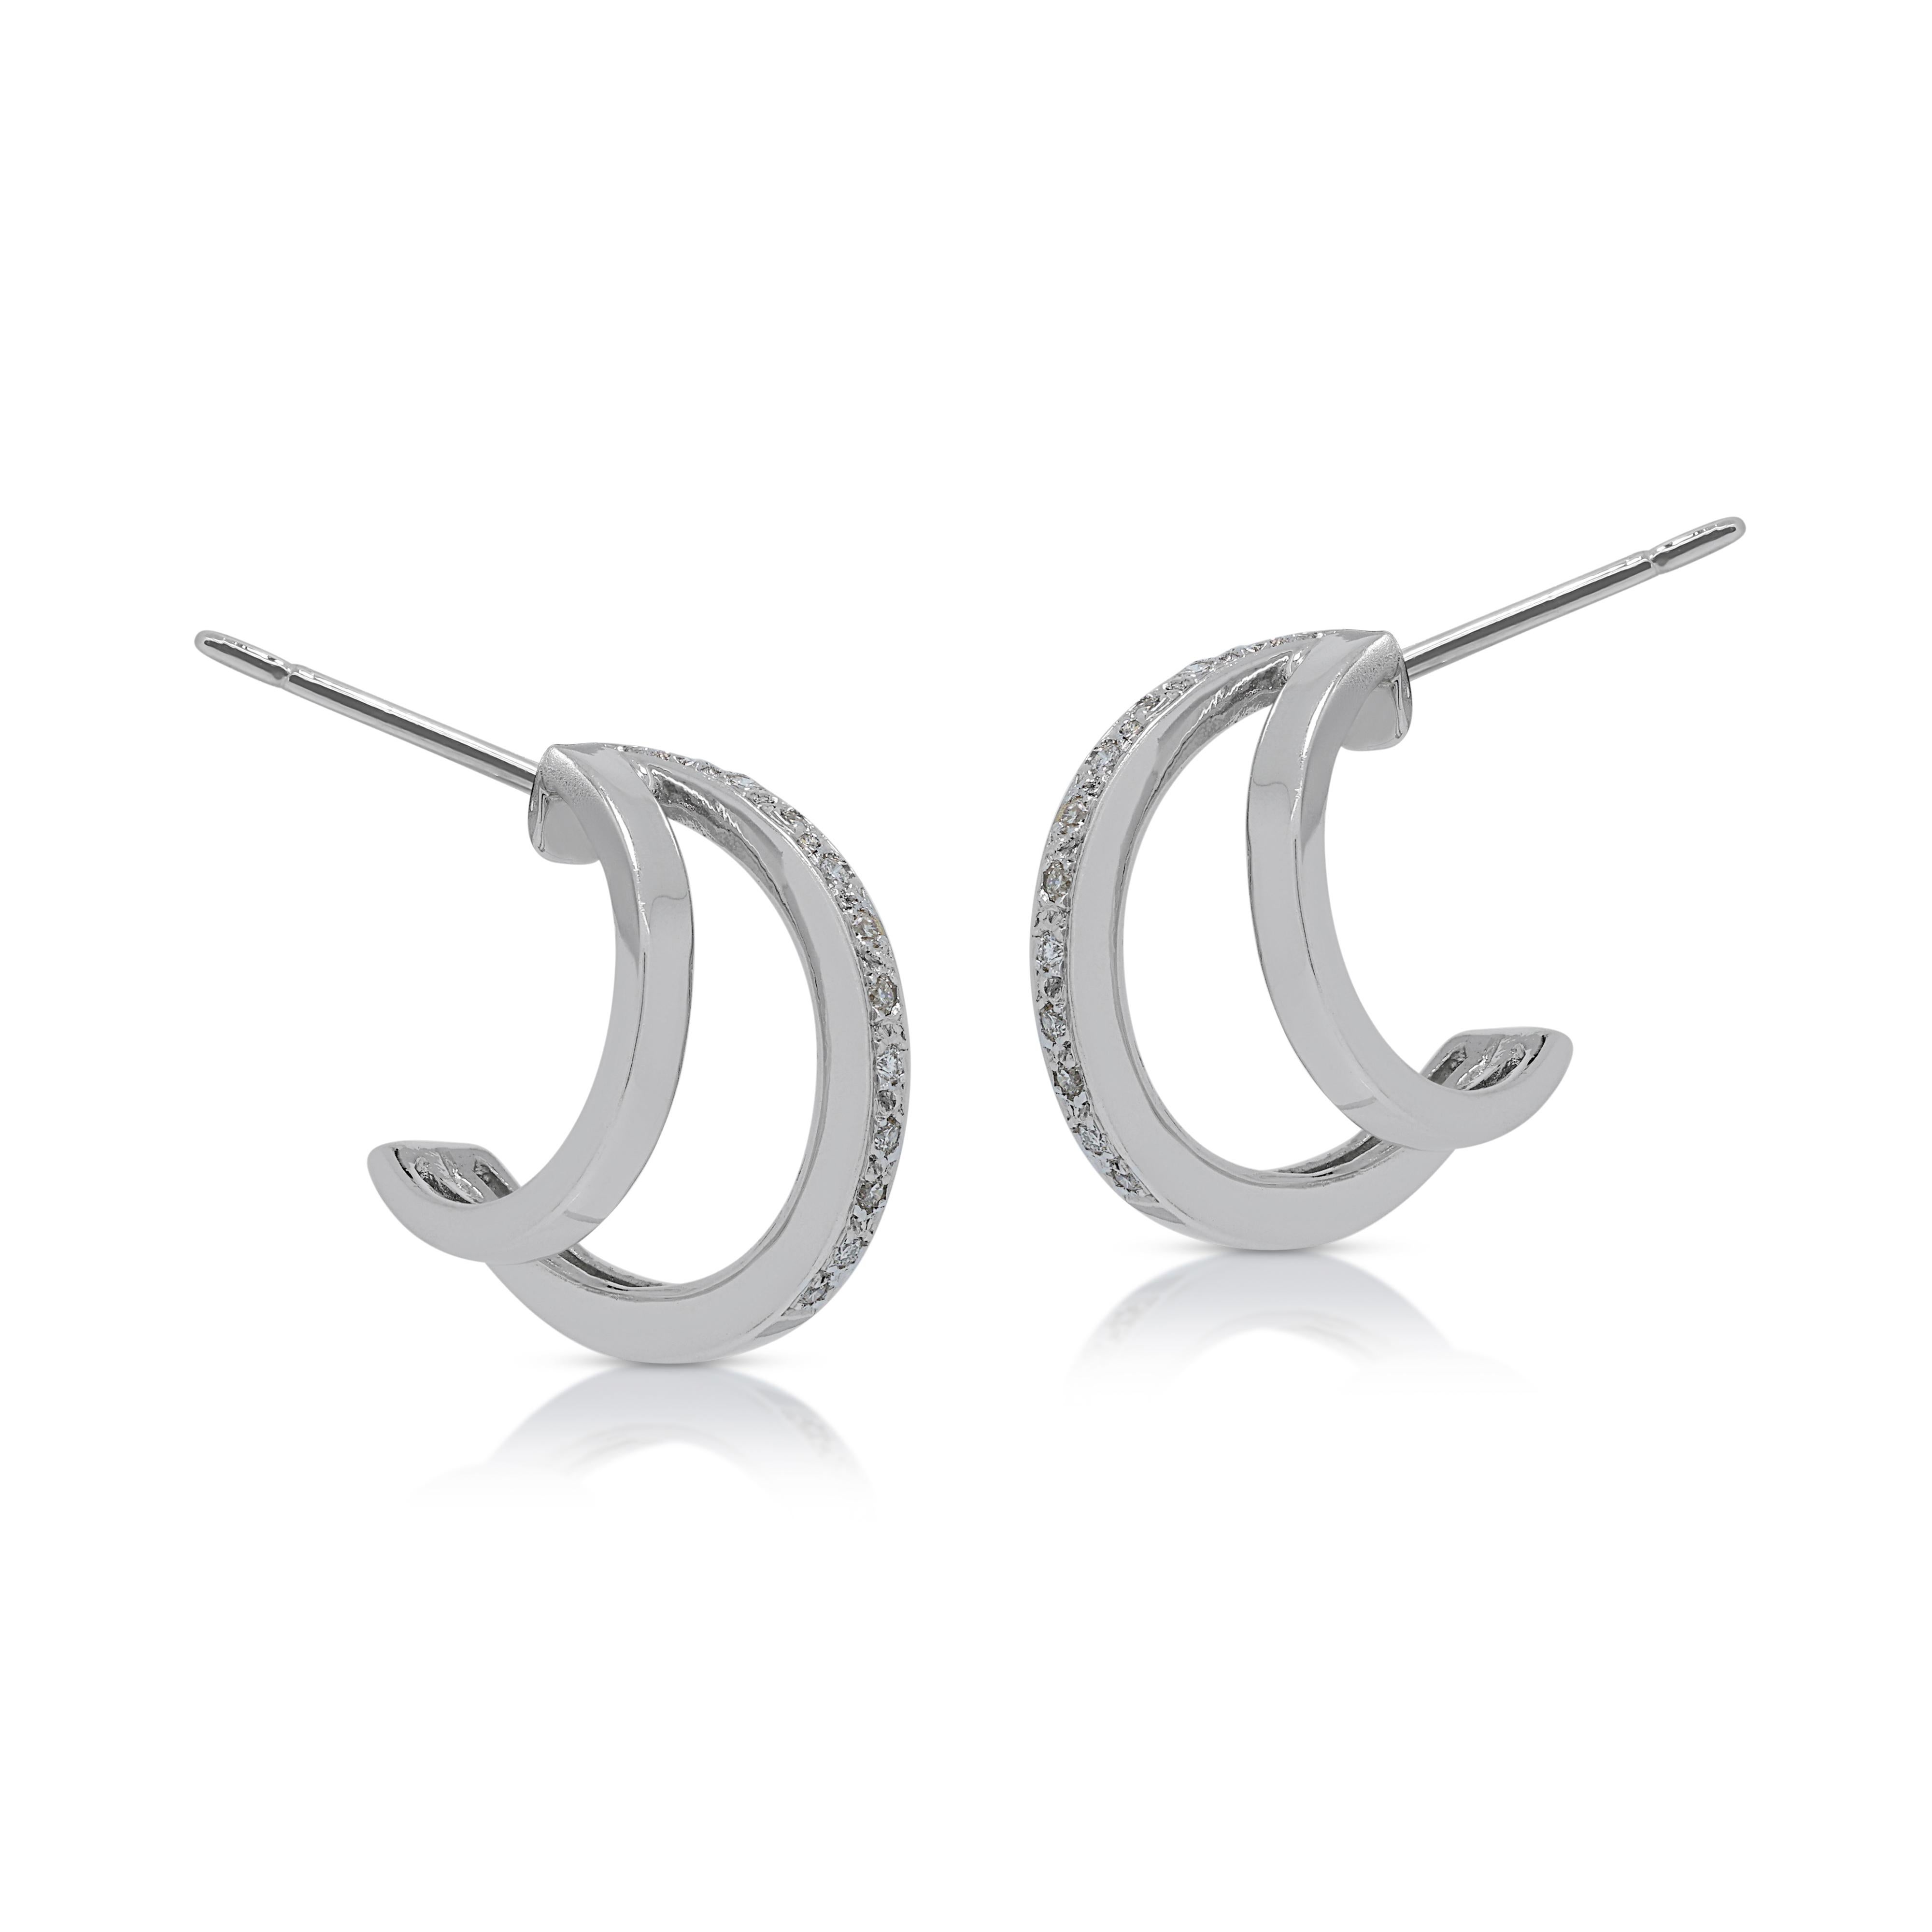 Lustrous 0.12ct Diamonds Hoop Earrings in 18K White Gold In Excellent Condition For Sale In רמת גן, IL